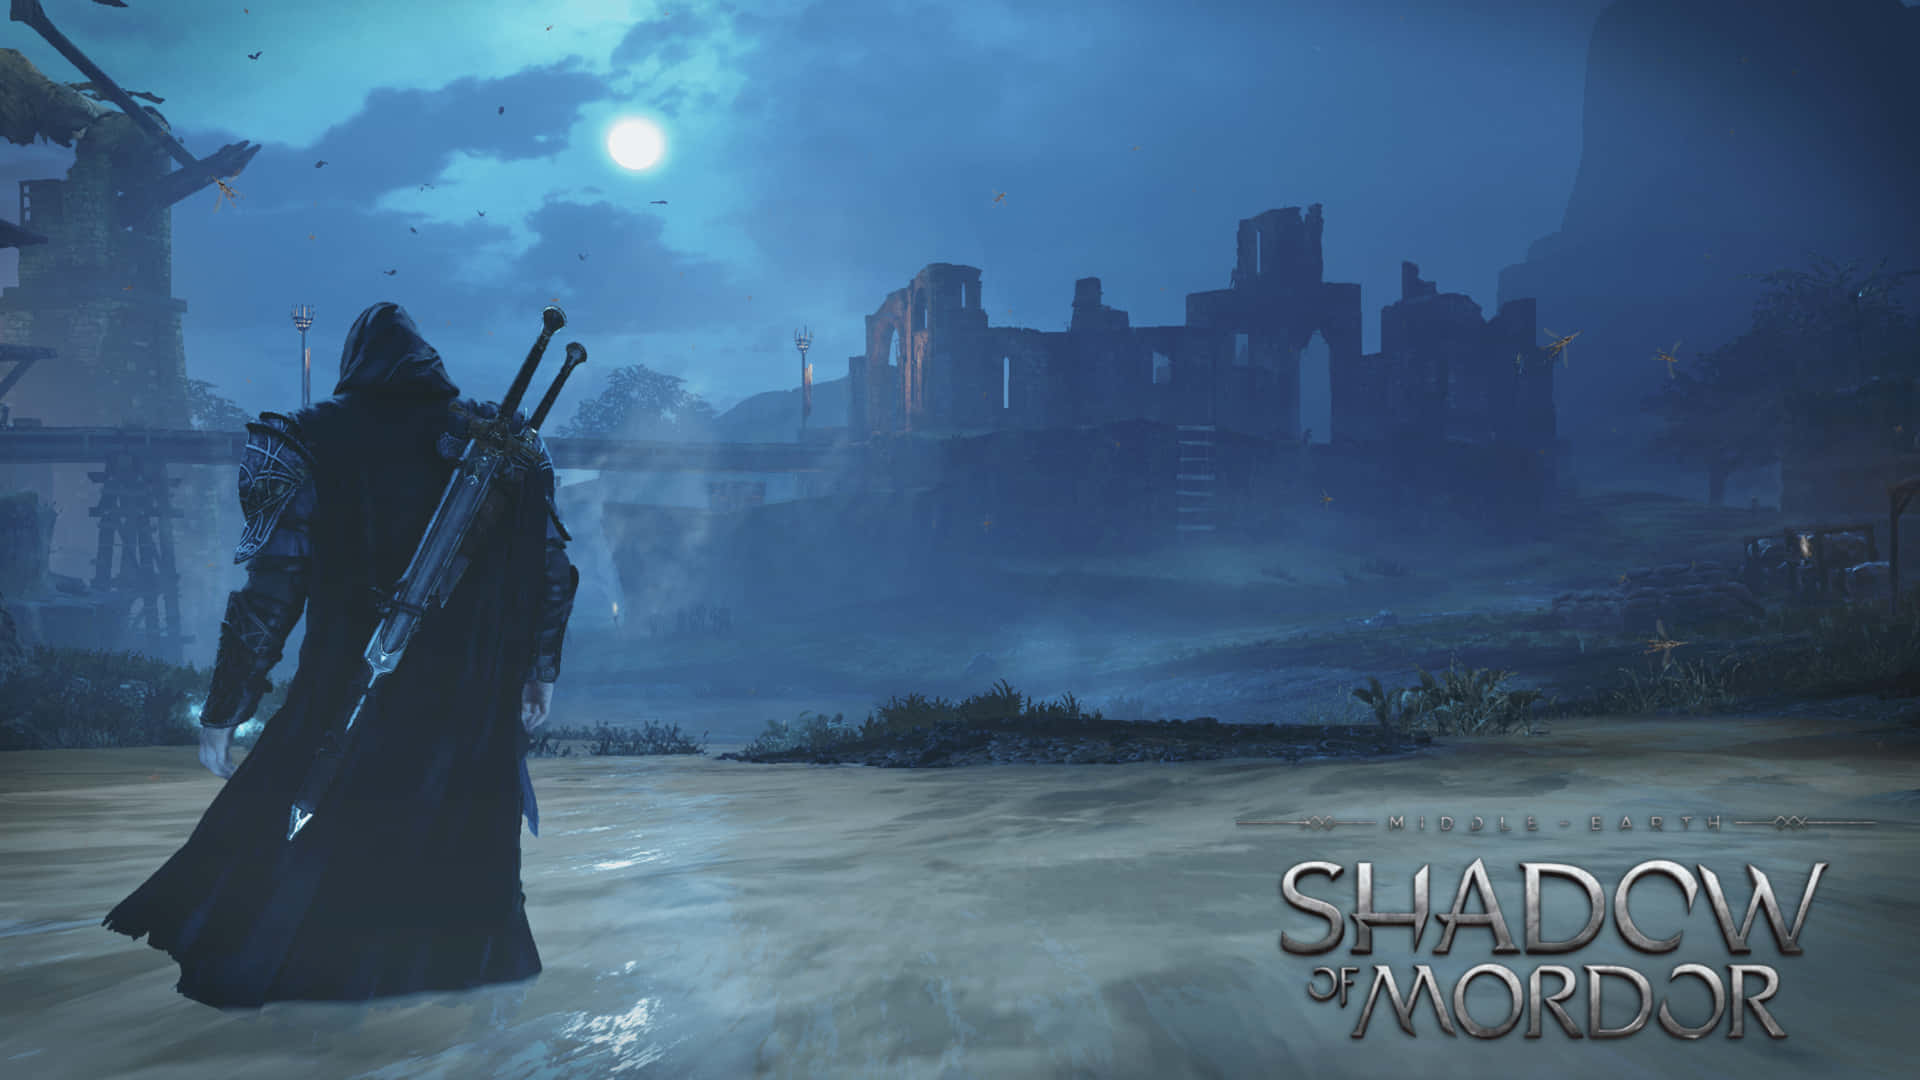 Bravely Challenge Your Fate with 4k Shadow of Mordor